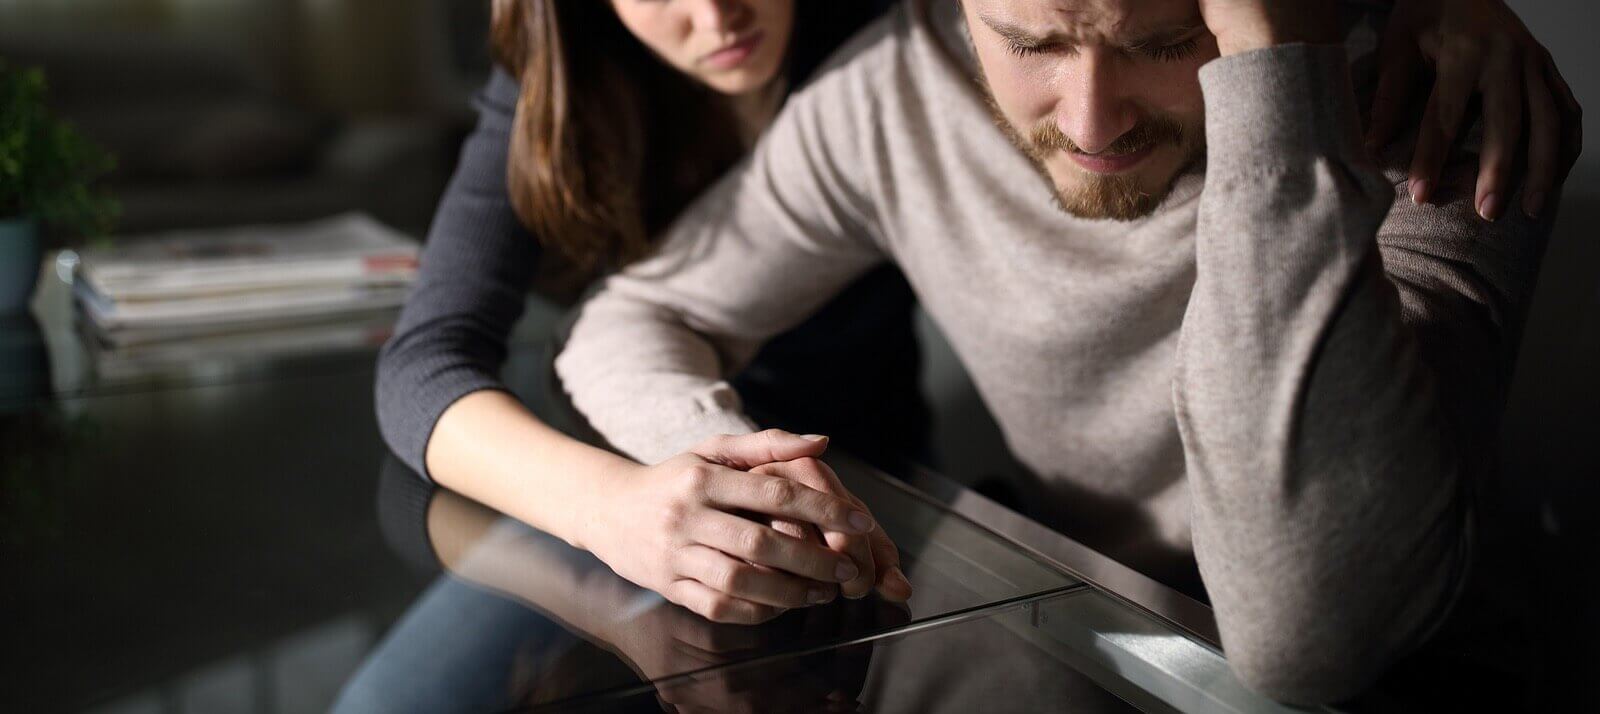 Photo of a sad man with a woman holding his hand and comforting him. Are you and your partner struggling with infidelity? Learn how a infidelity recovery program in Florida can help you find support.